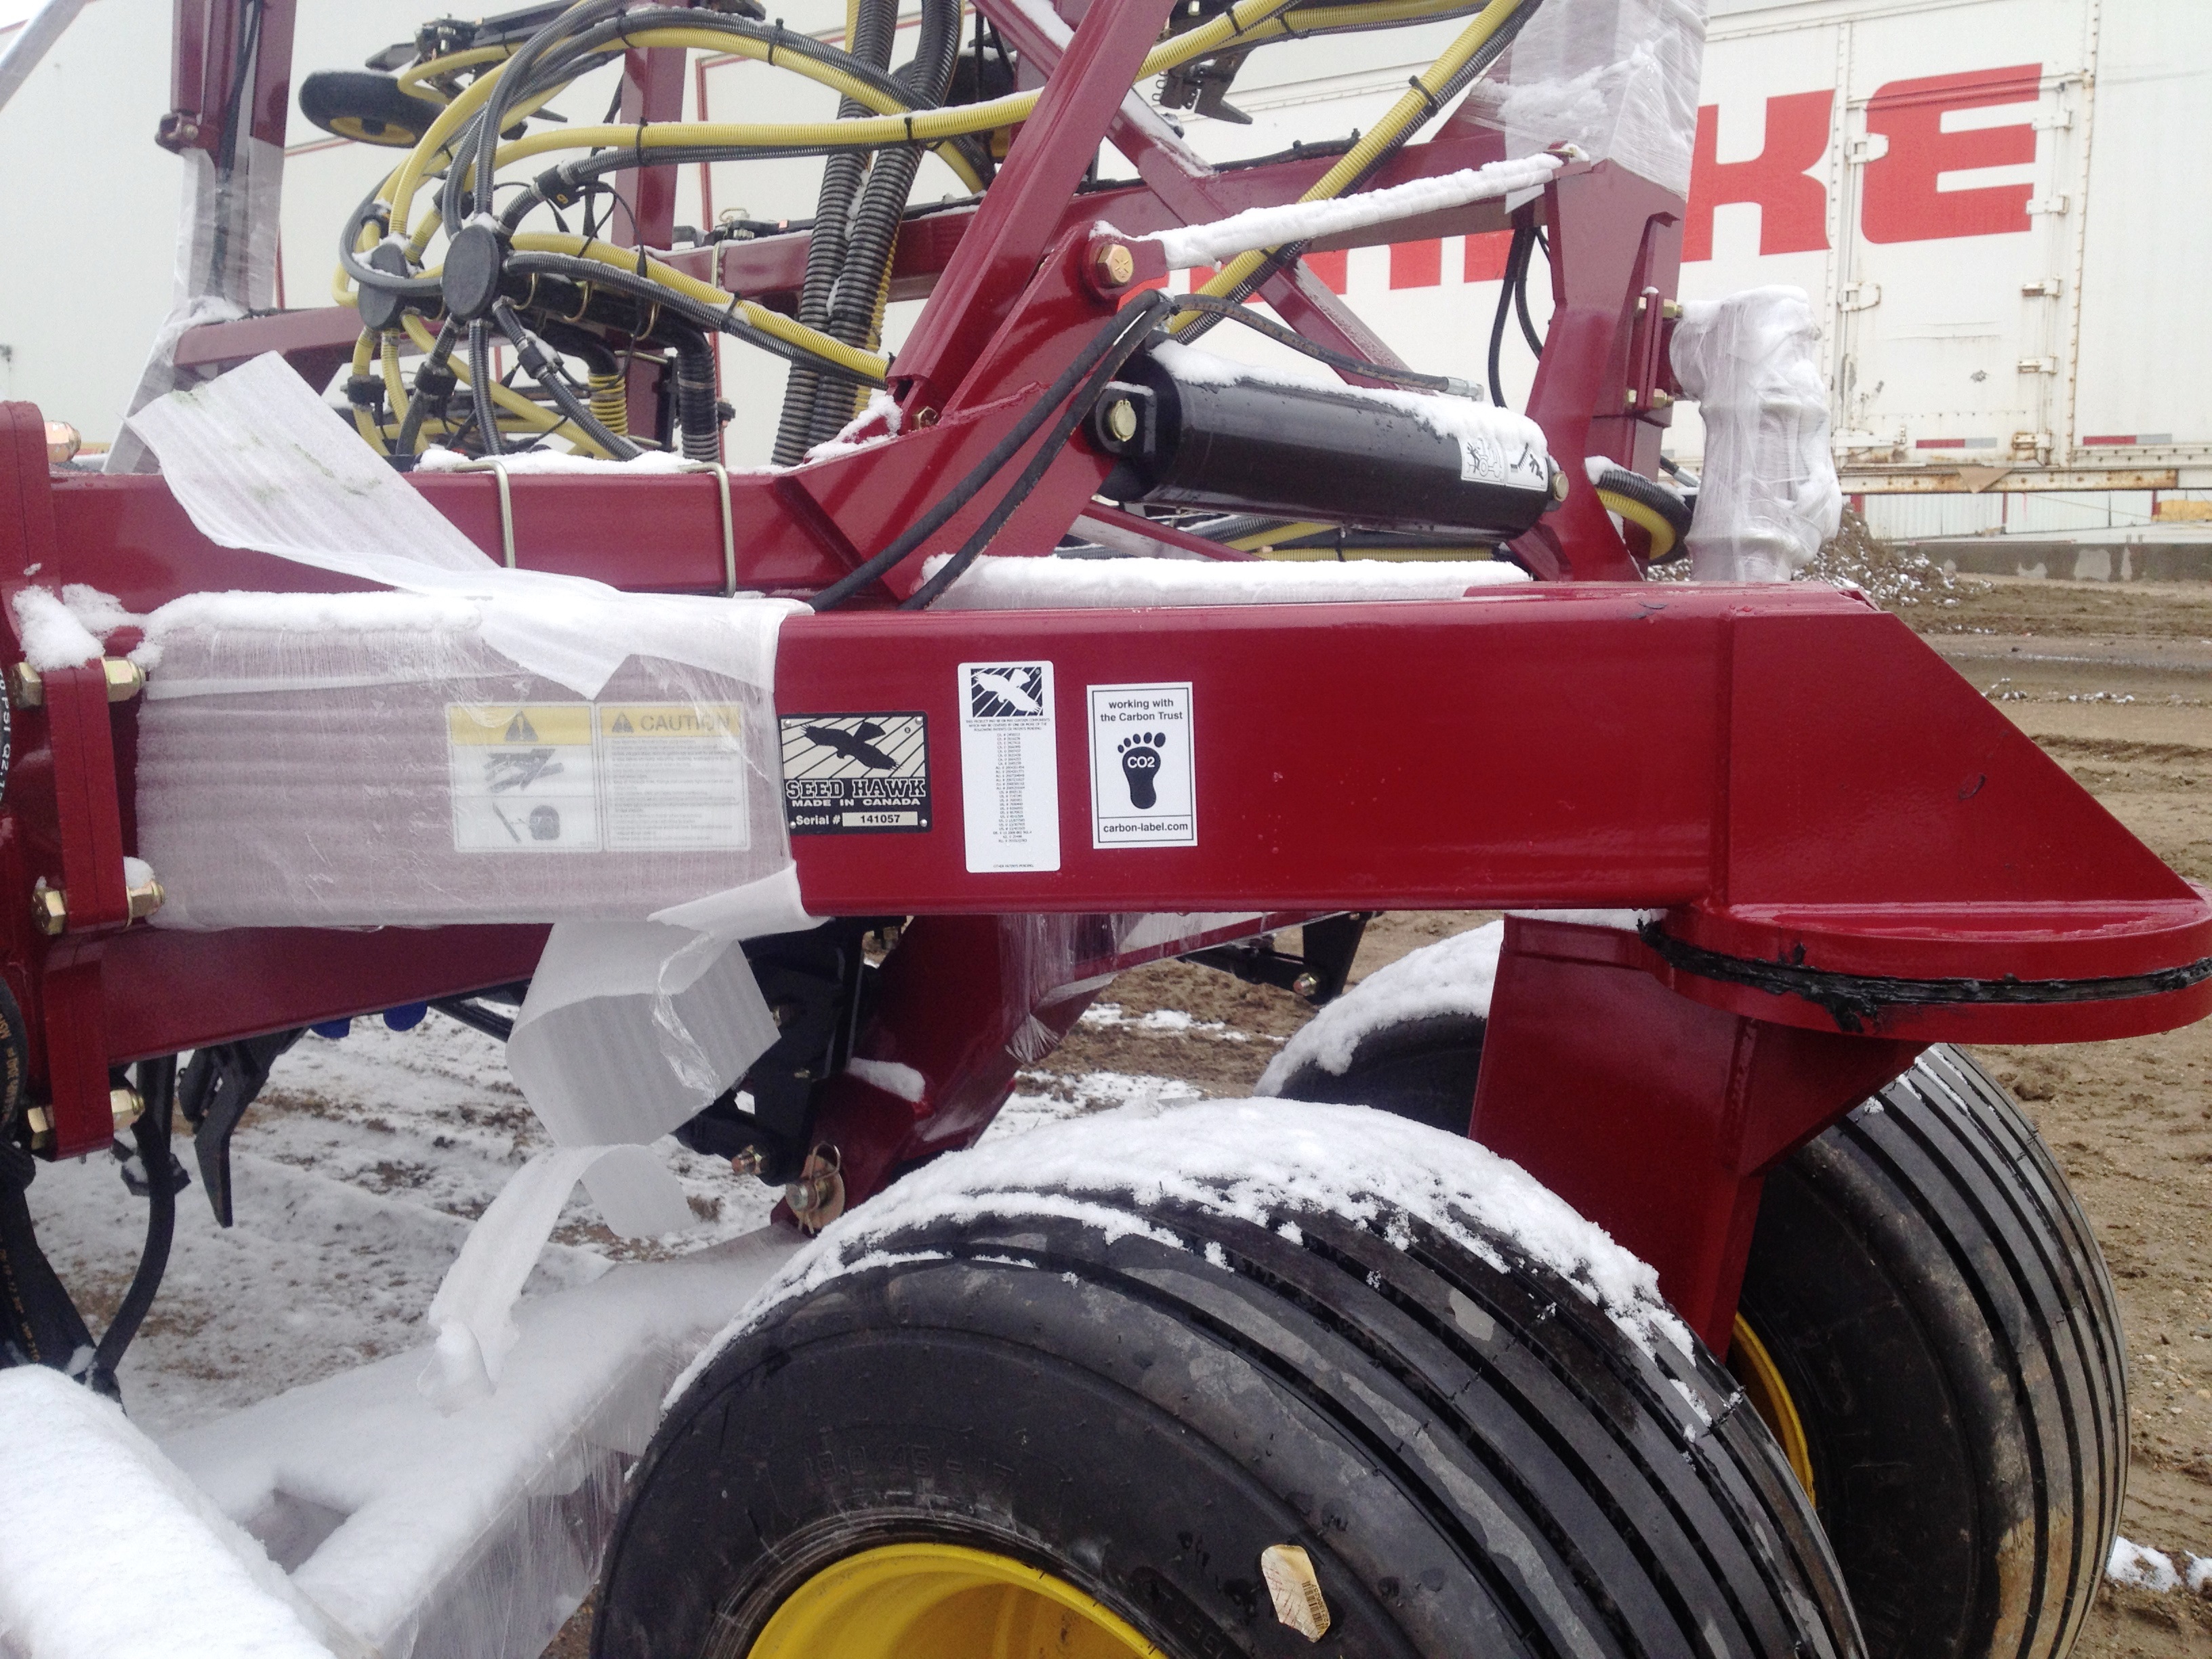 red ag equipment with eco label on it